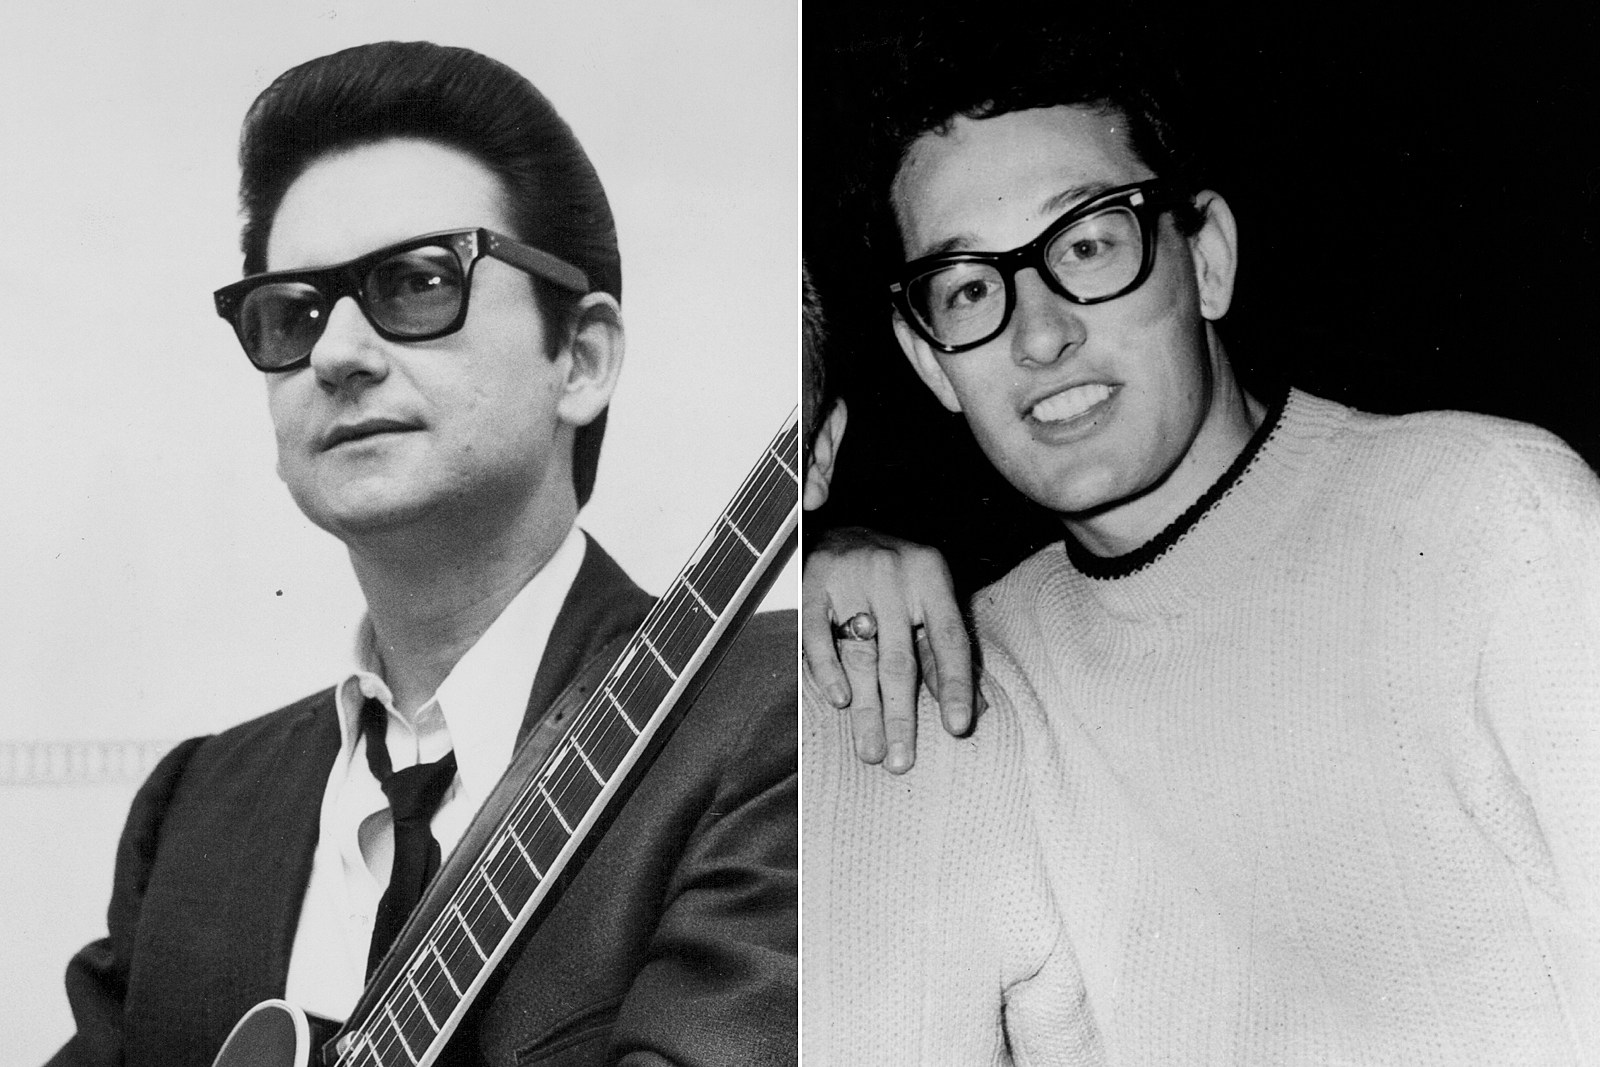 YARN  When I was your age my mother told me not to get a tattoo of Roy  Orbison  The Waterboy 1998  Video clips by quotes  d5e2f23c  紗